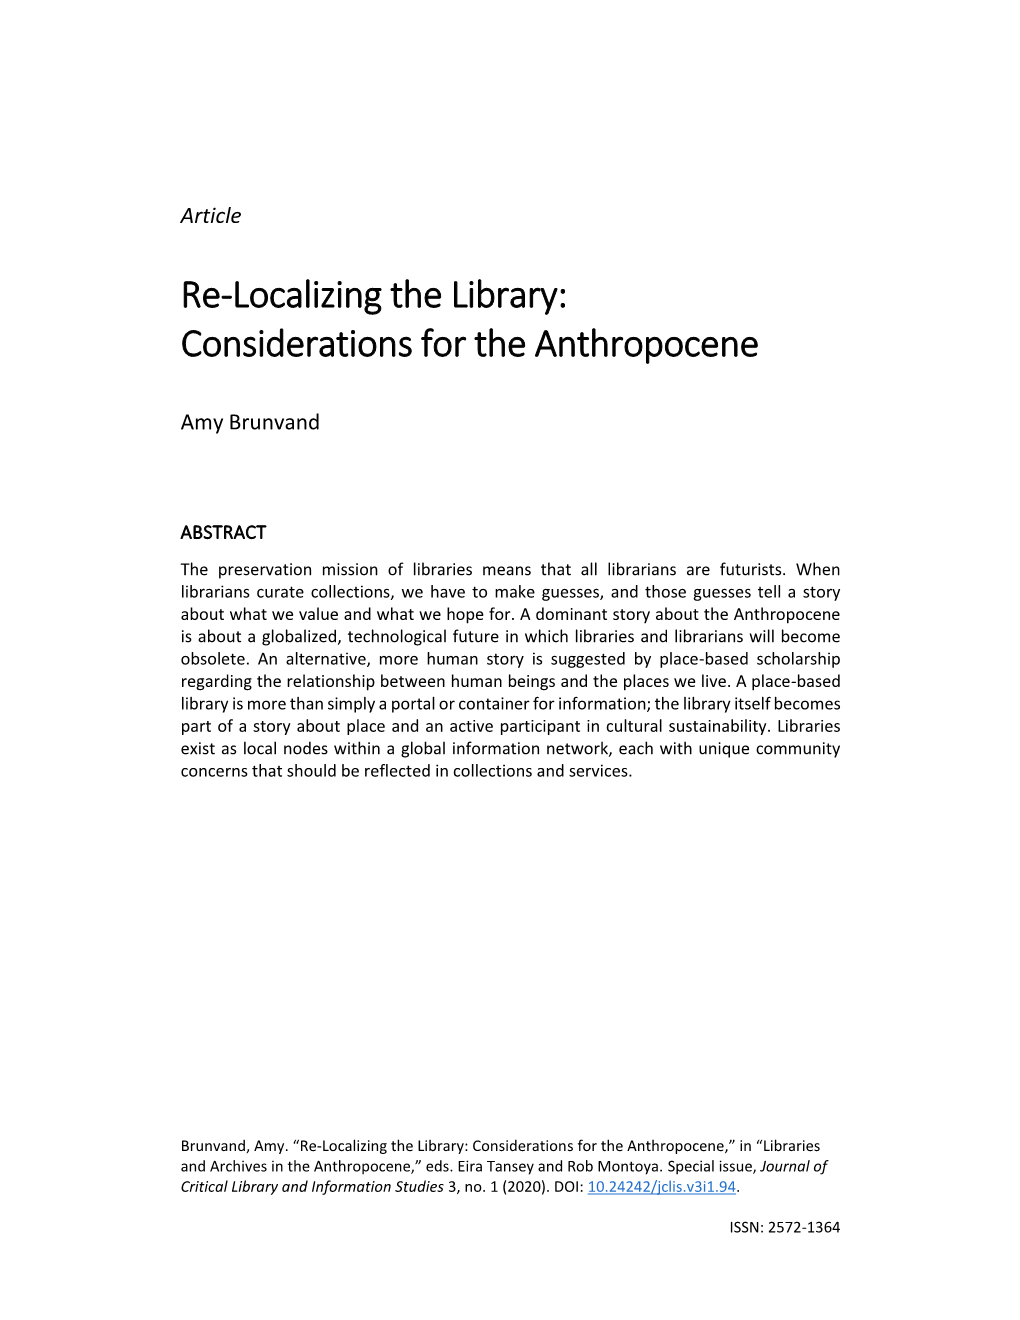 Considerations for the Anthropocene